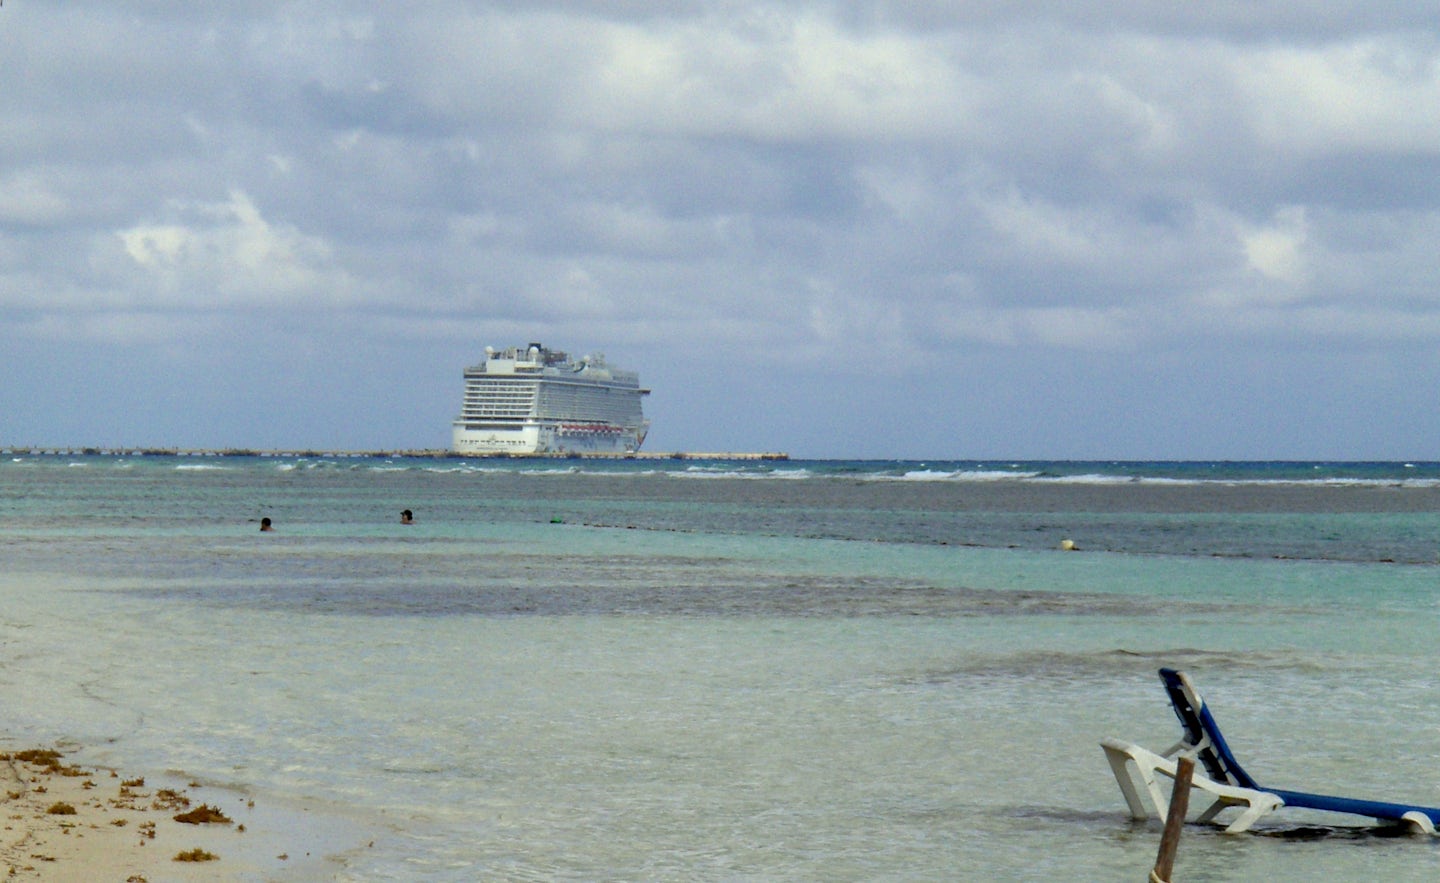 The view of the ship from the beach at Caribbean Life in Costa Maya Mexico.